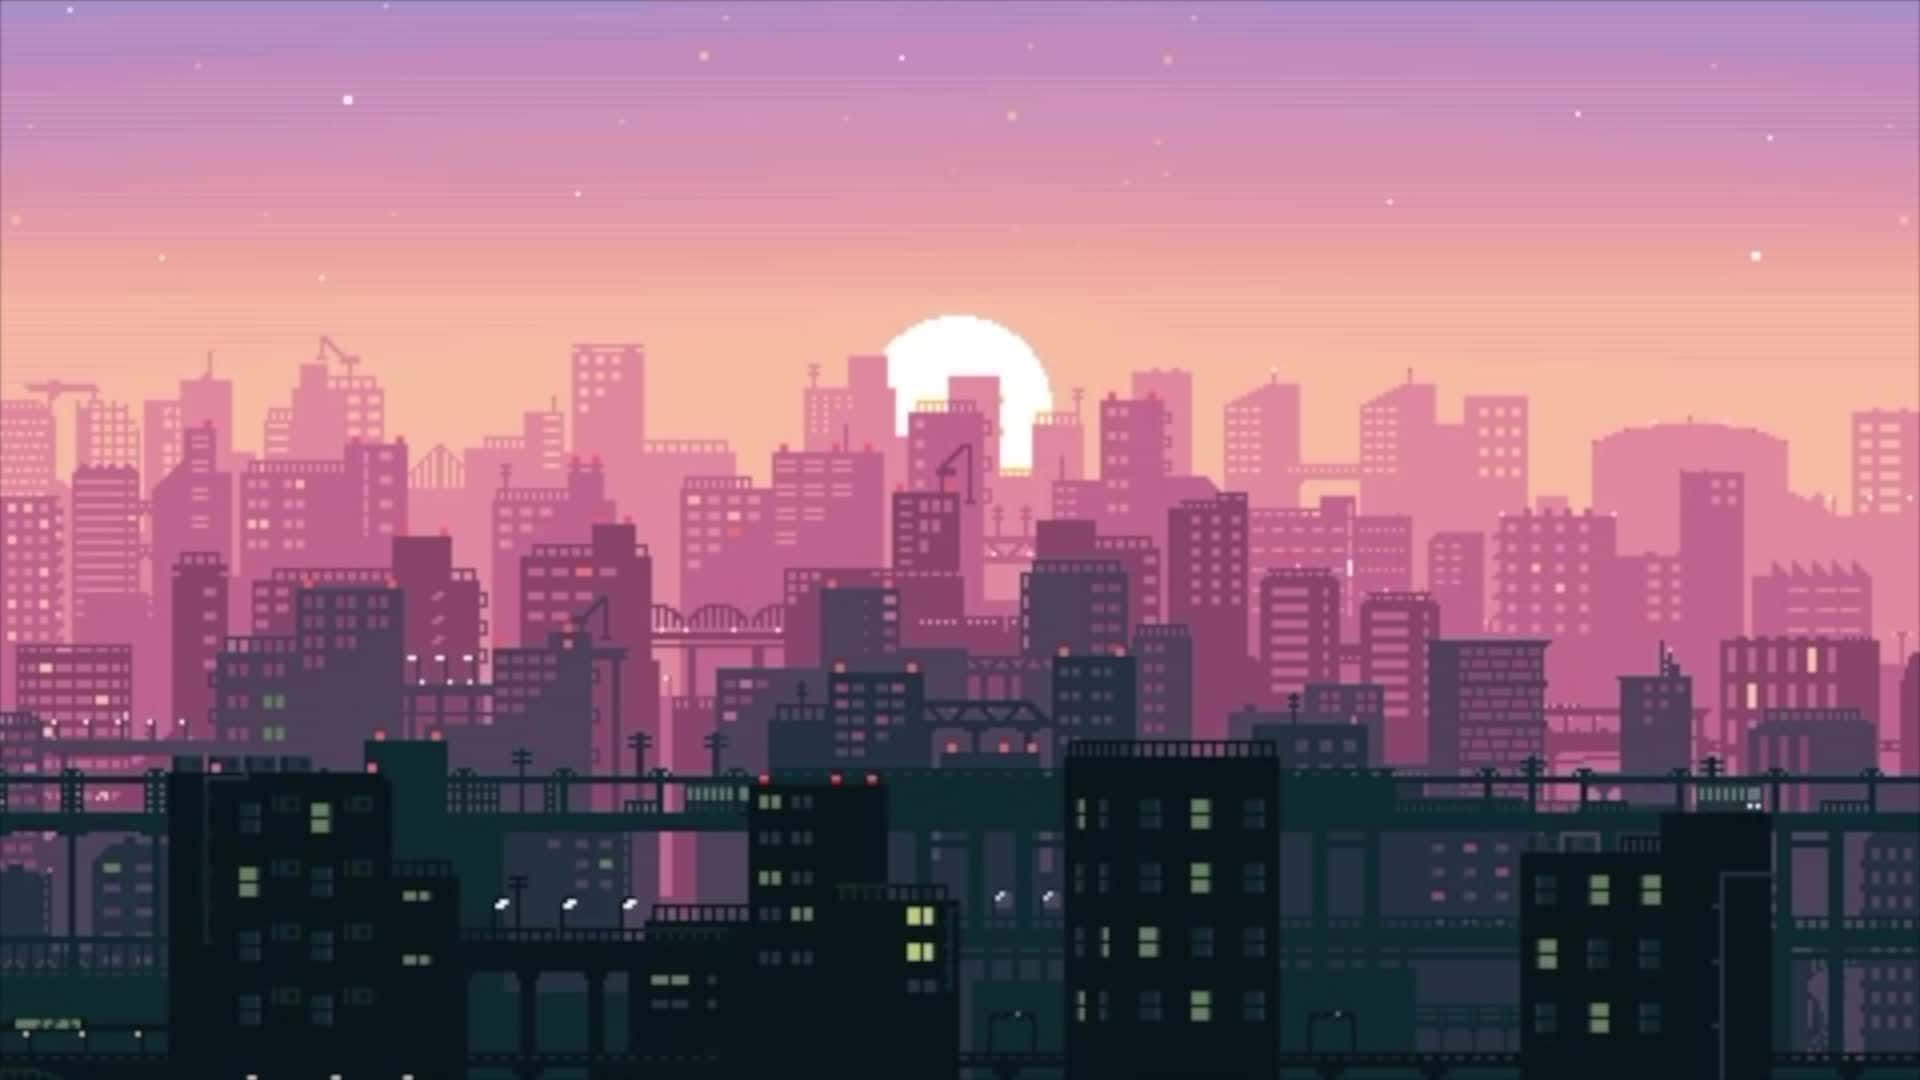 "Chill out with this vintage-inspired lofi background!"